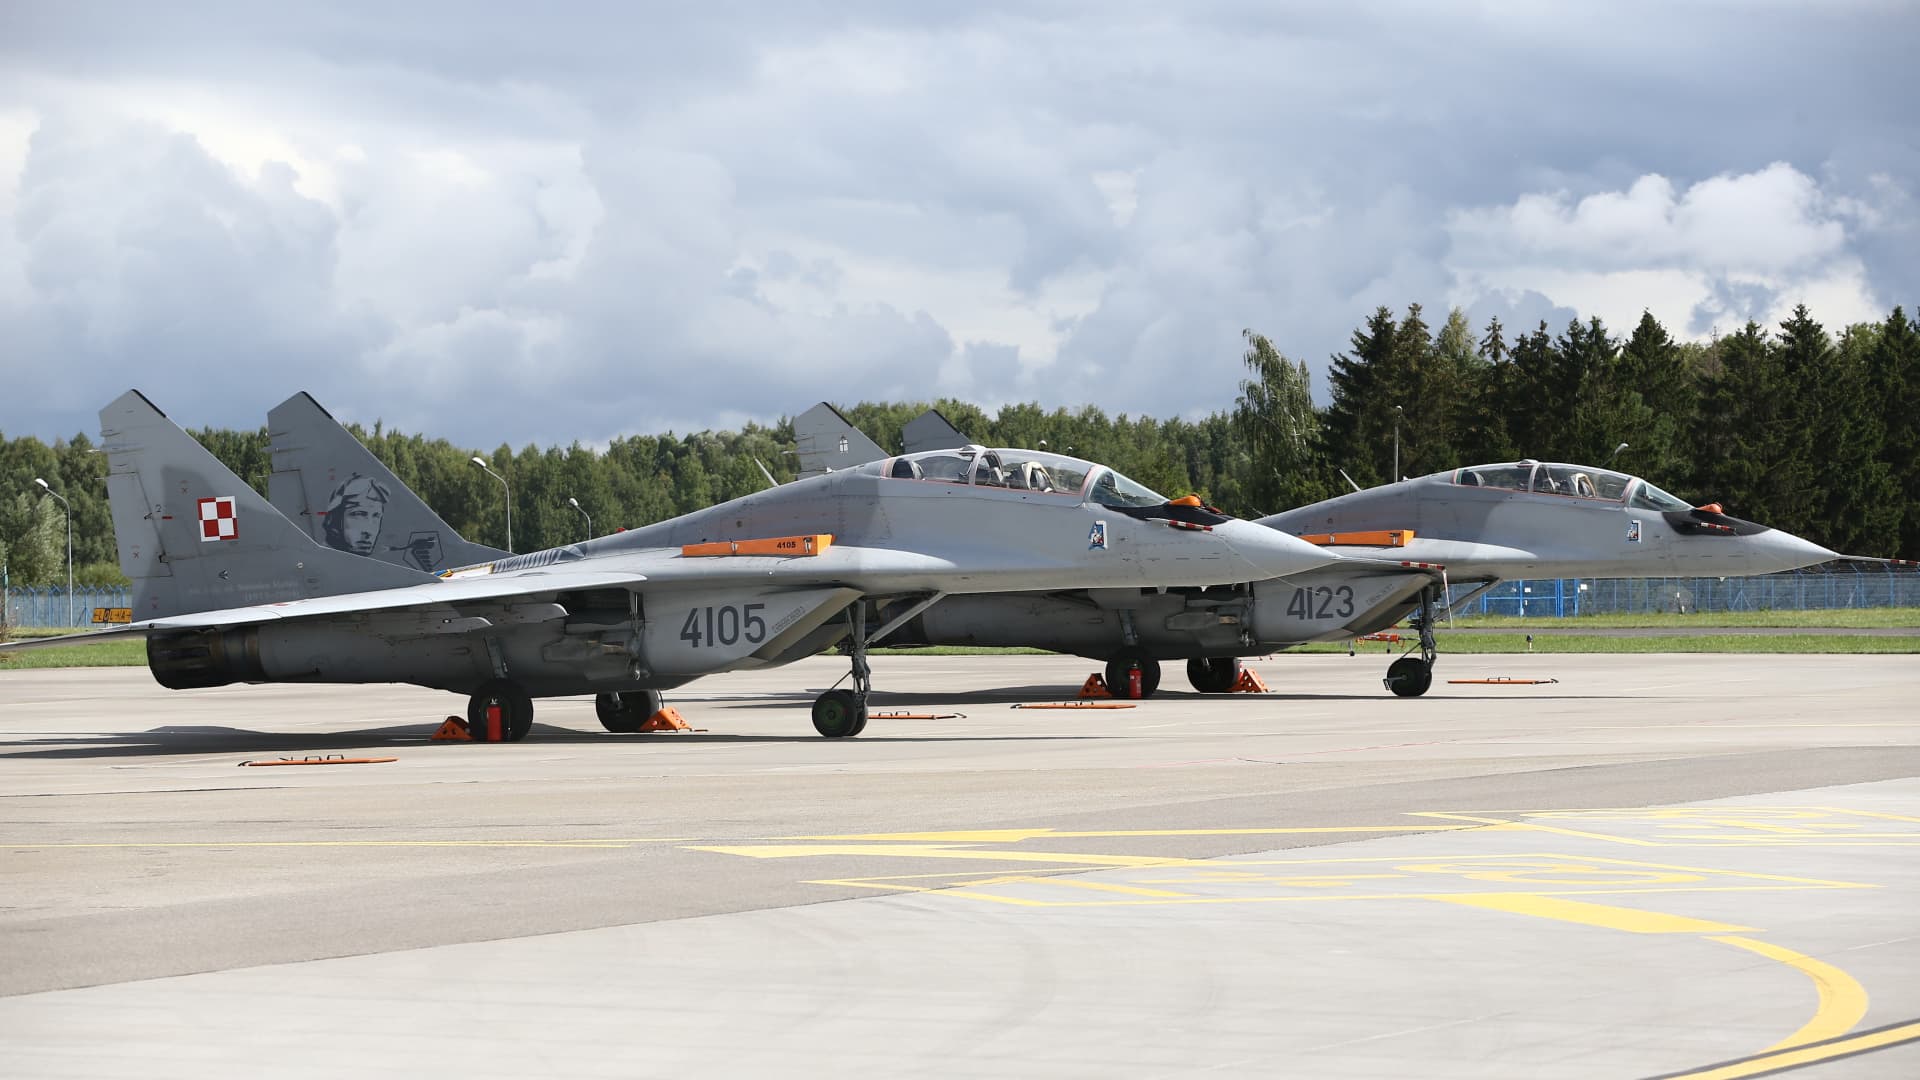 Two Polish MiG-29s sit at an airbase in Malbork, Poland, in this file photo from August 2021.